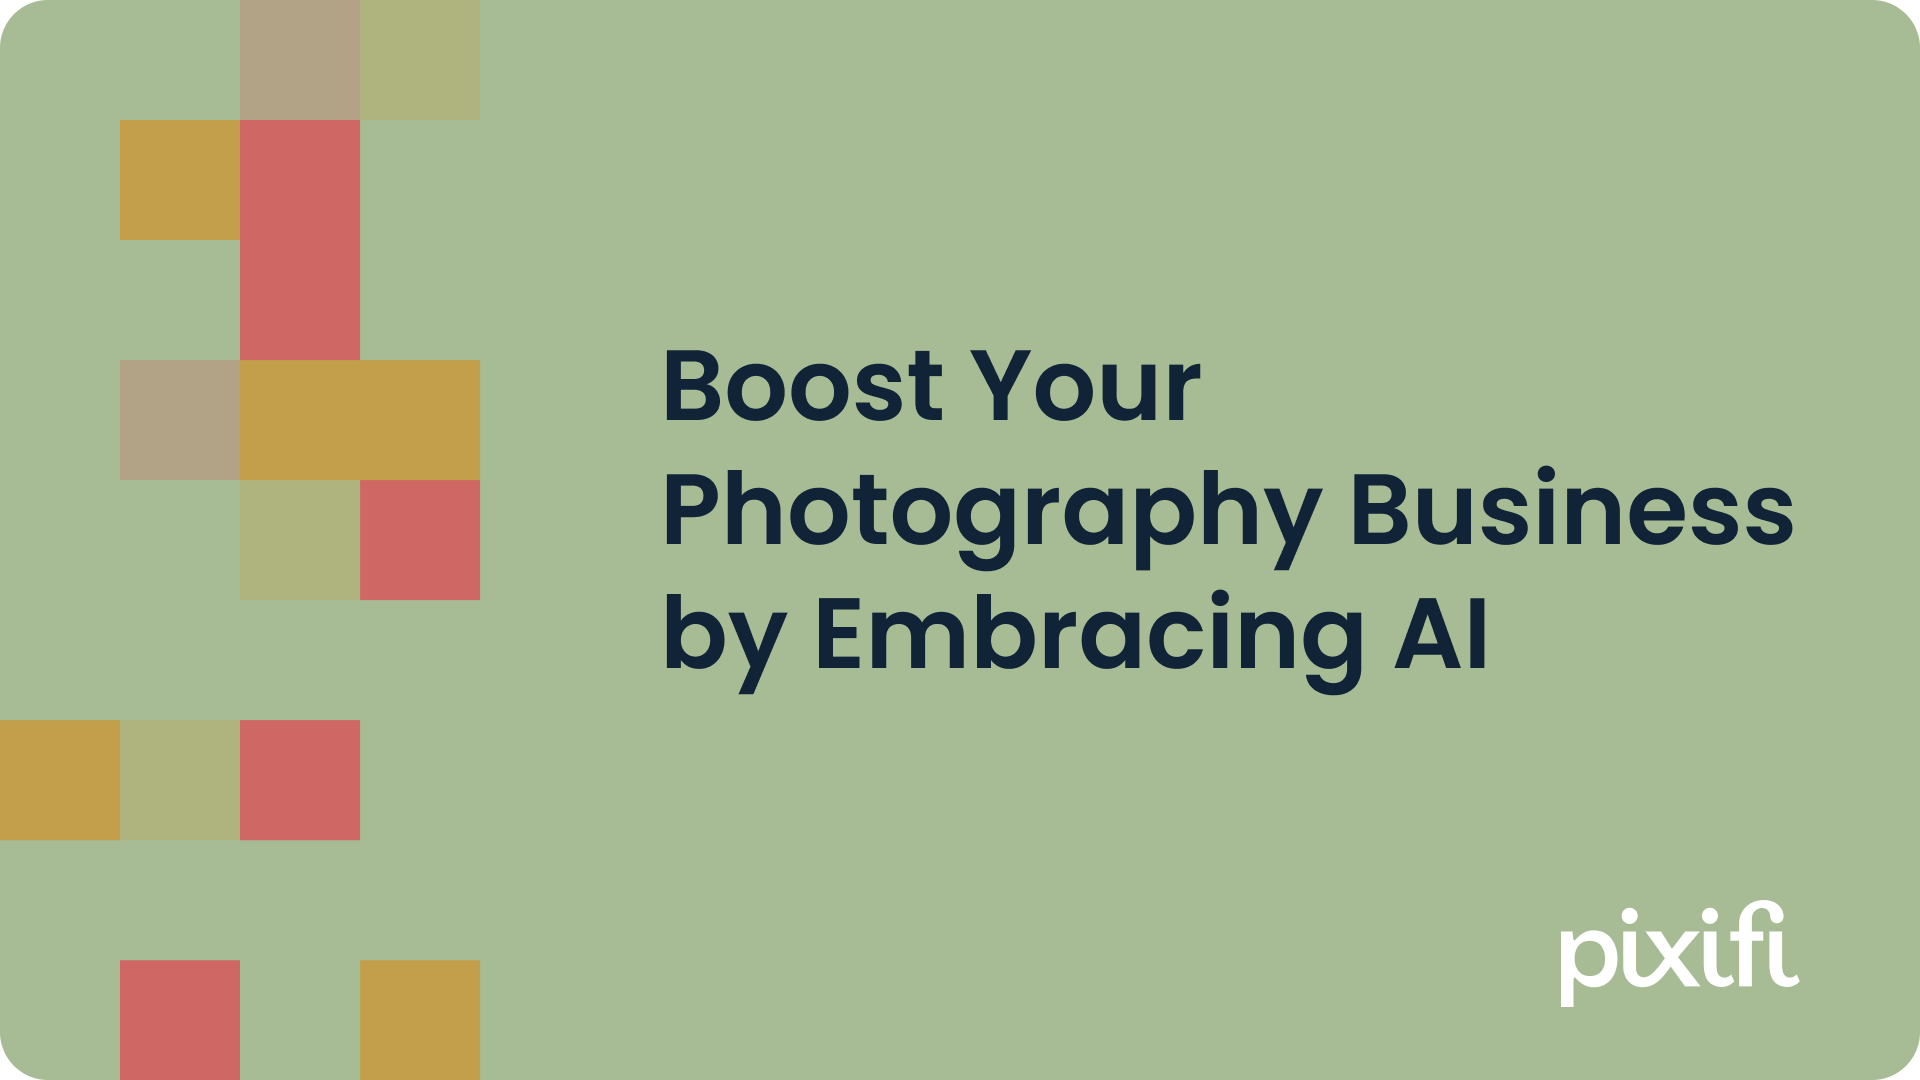 Boost Your Photography Business by Embracing AI